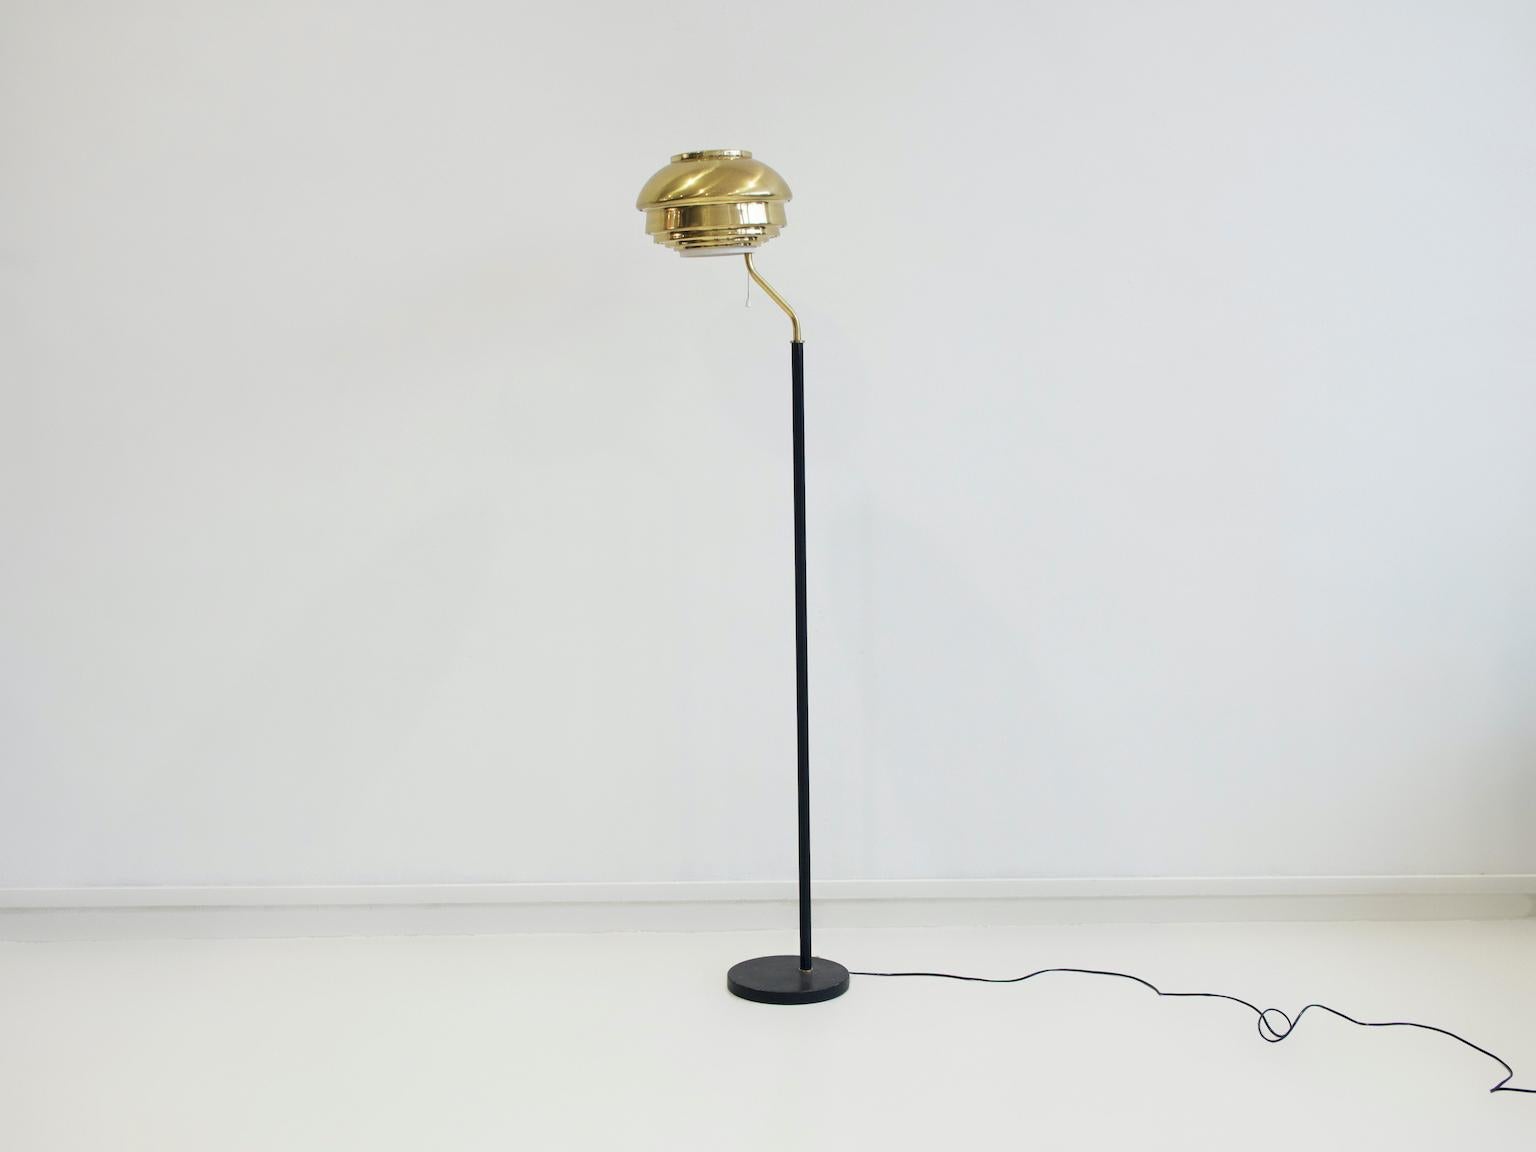 The A808 lamp was designed by Alvar Aalto in 1955 for the National Pensions Institute of Helsinki. This floor lamp has been manufactured by Valaisinpaja Oy, Finland in circa 1970s. The shade is made of layered brass strips and white painted metal,